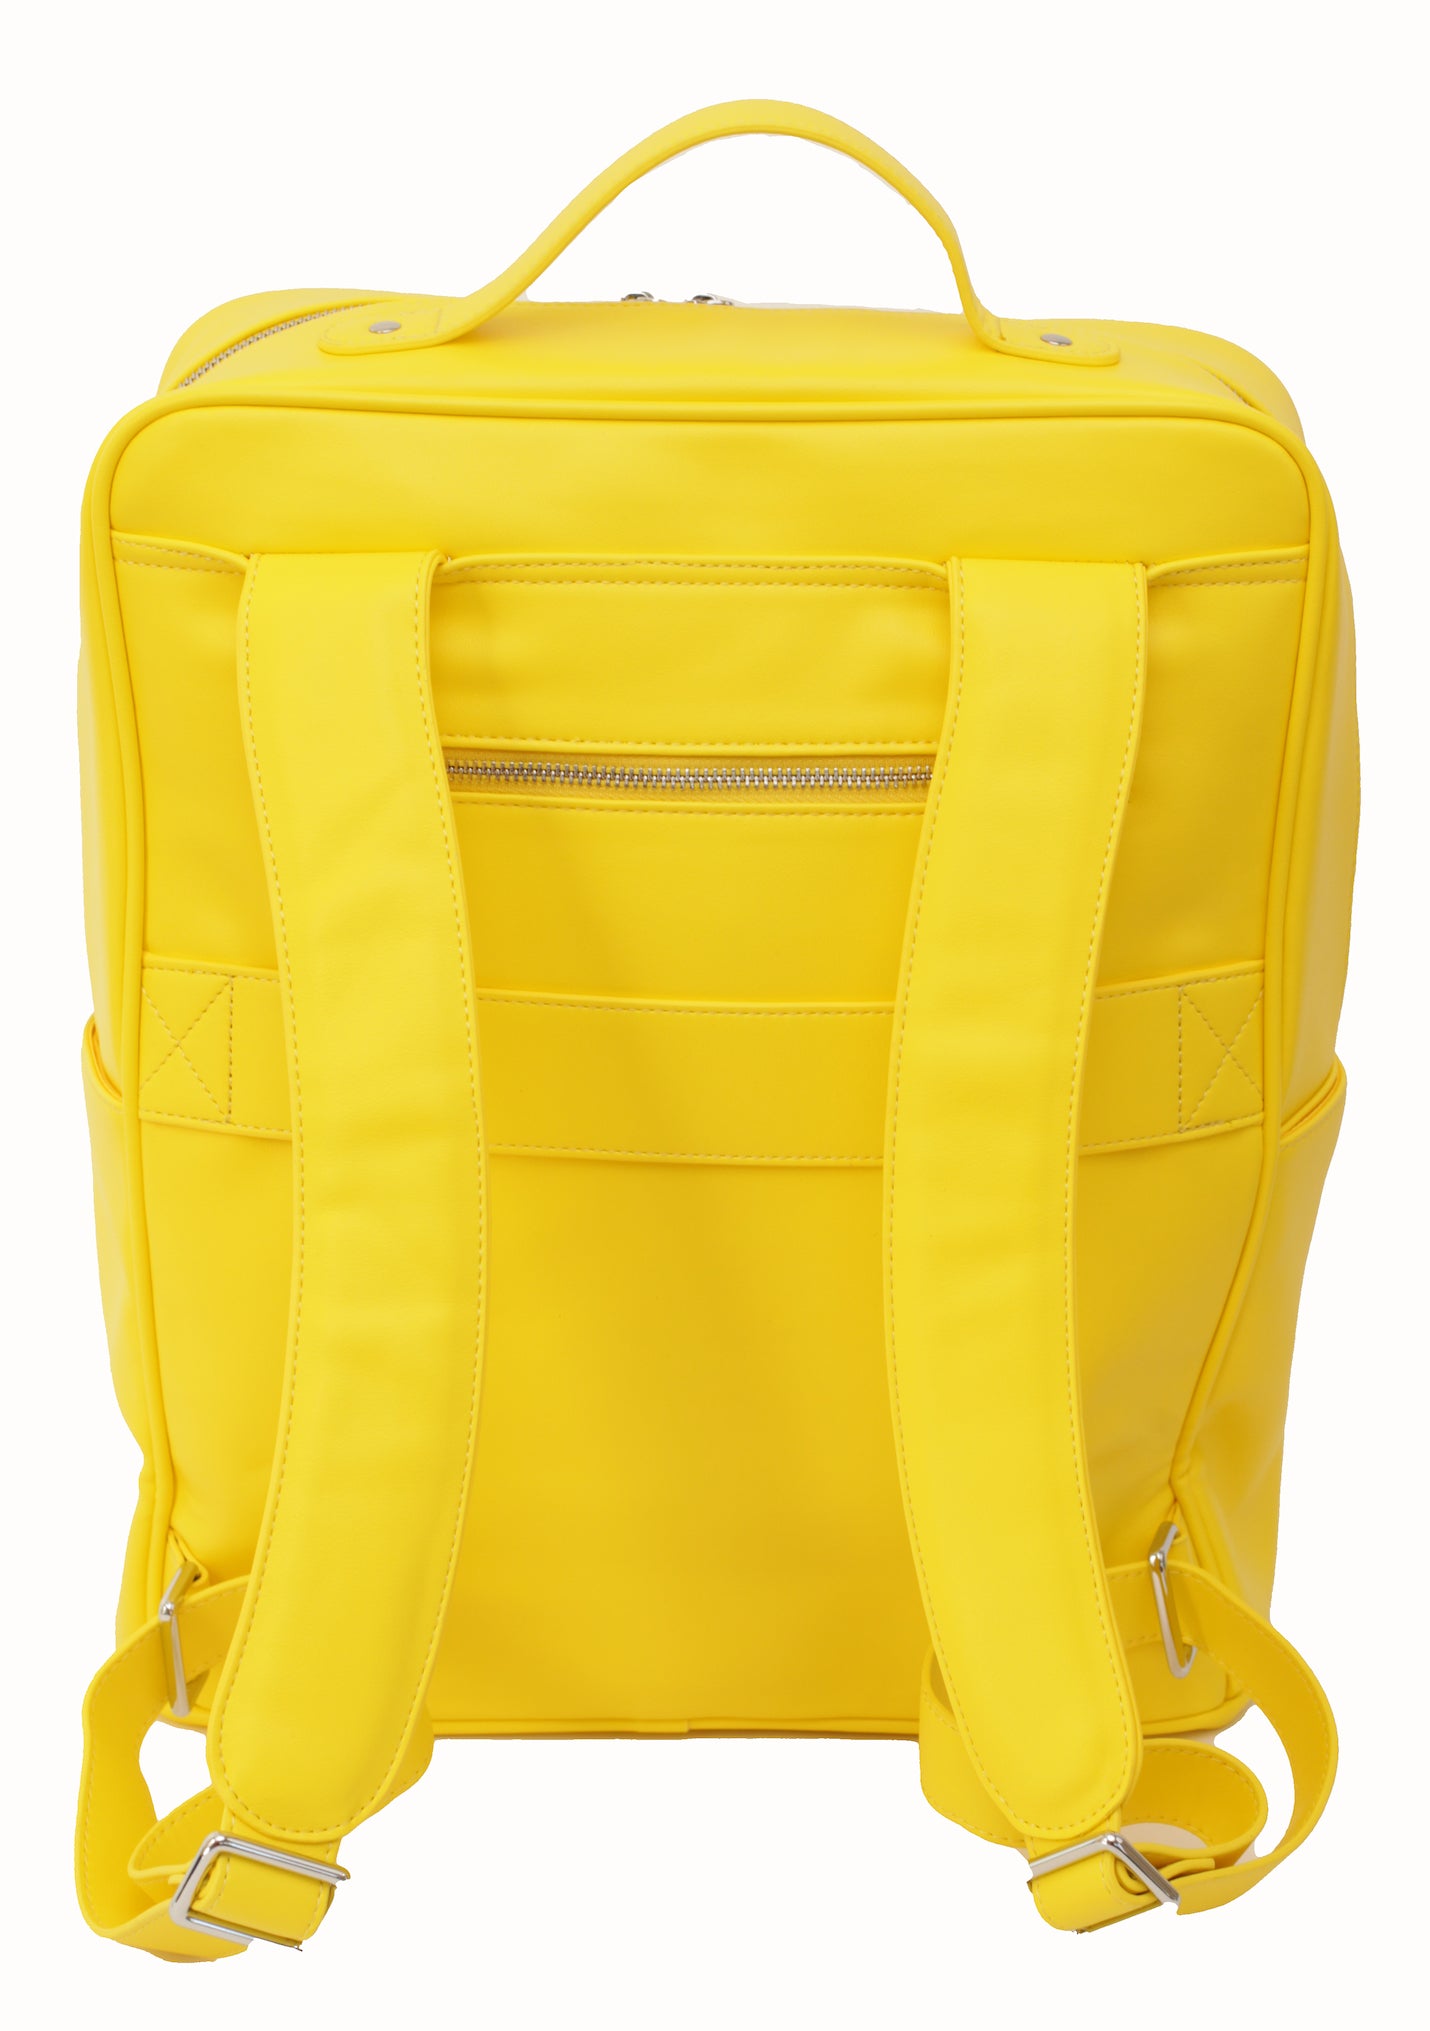 Elite Crafts EC Backpack Off White Black Yellow Color 21 L Laptop Backpack  Black, Yellow - Price in India